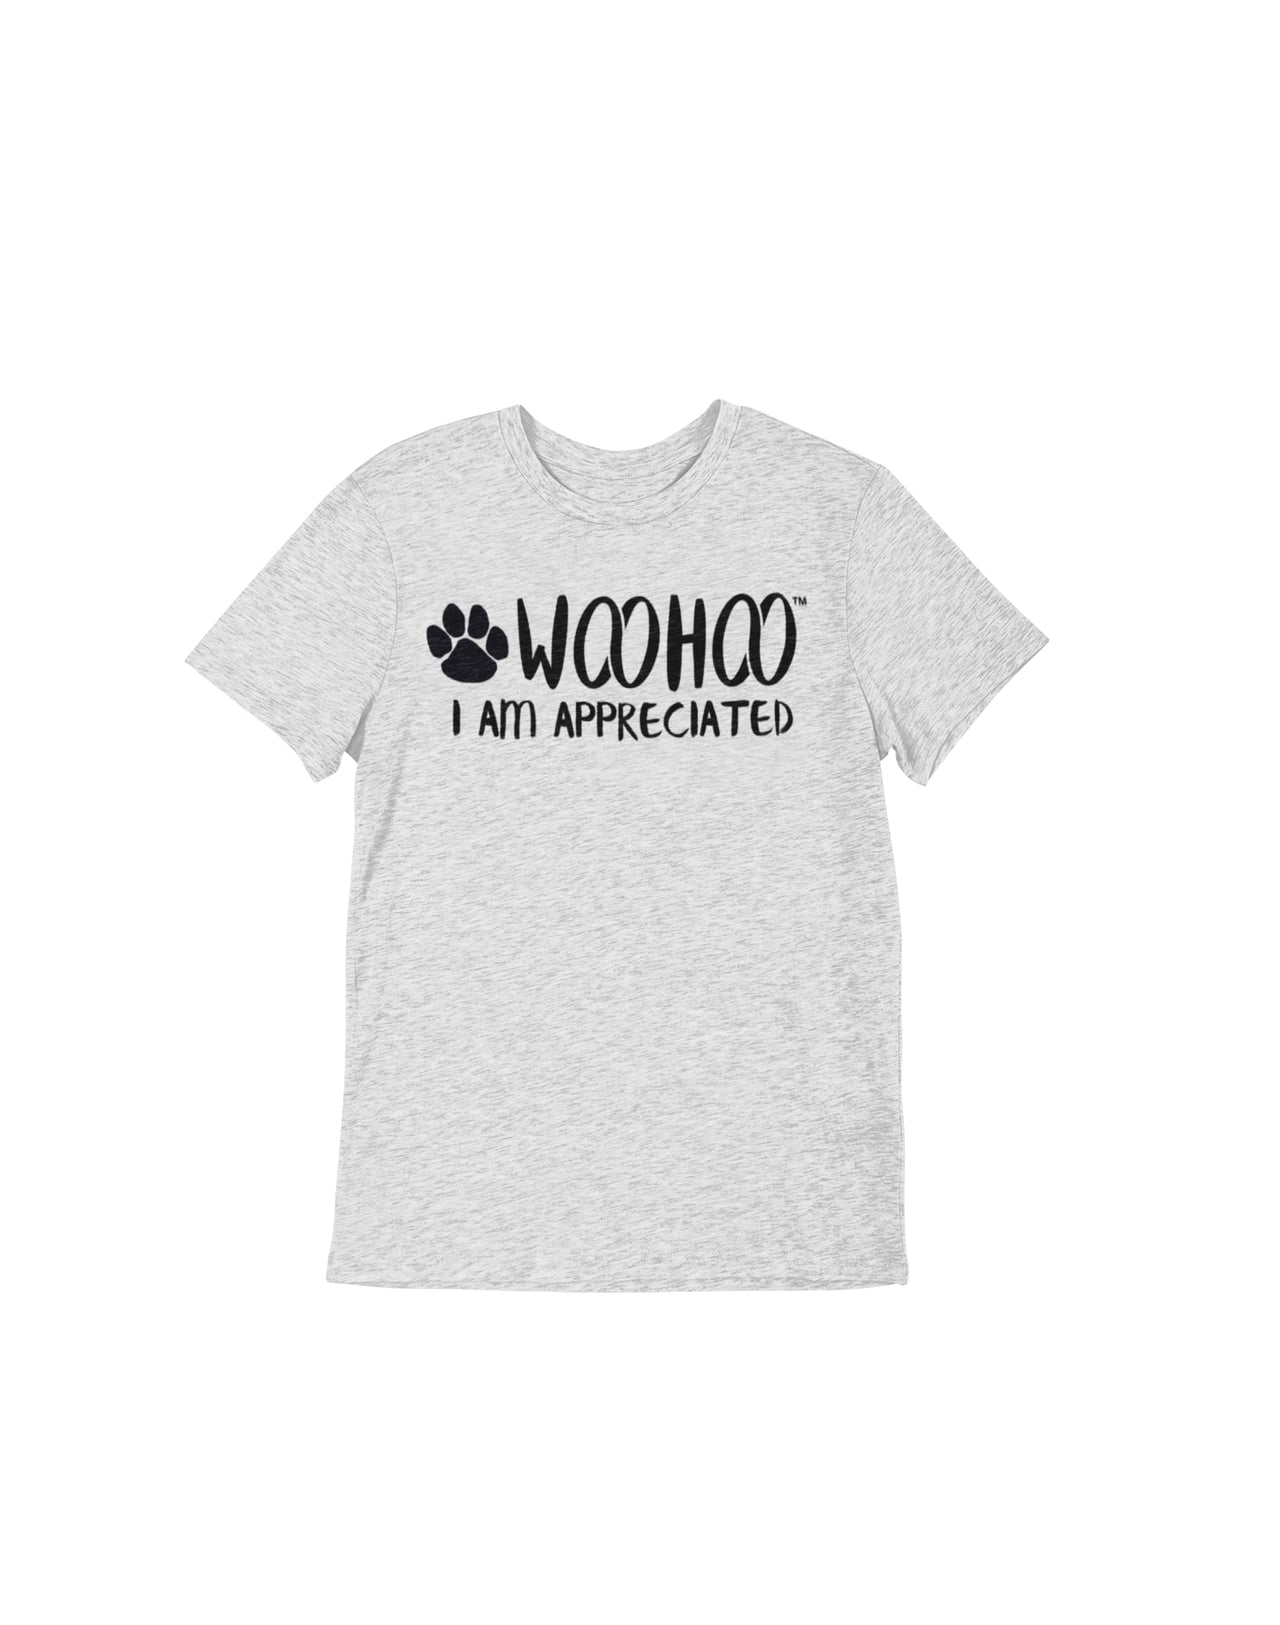 Heather Gray Unisex T-shirt with the text 'WooHoo I am appreciated,' accompanied by a pet paw design. Designed by WooHoo Apparel